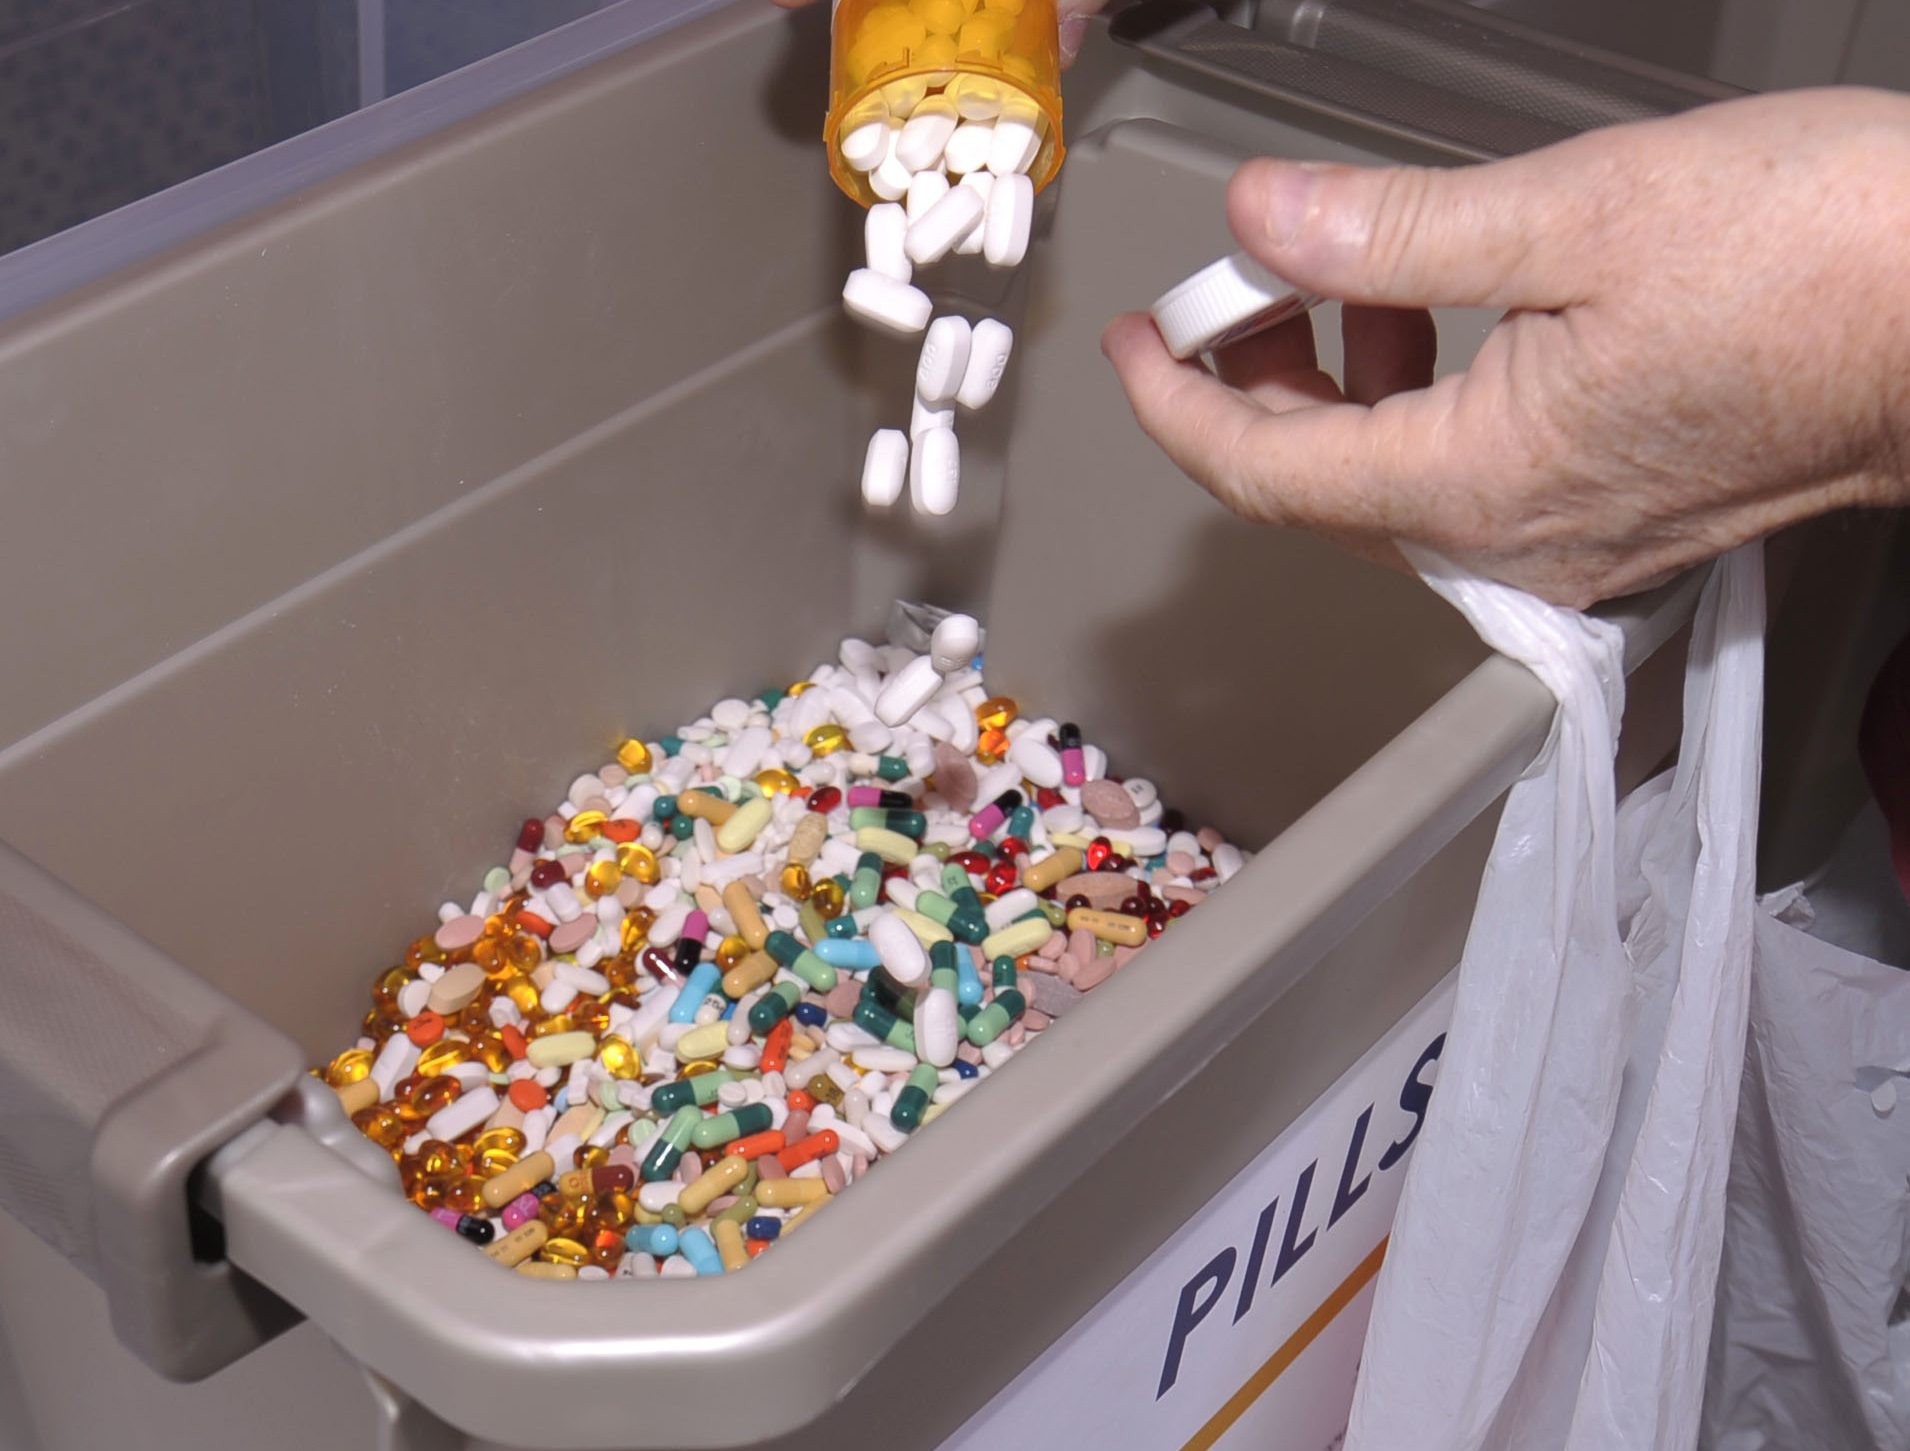 Area residents dispose of unneeded medications at the drug take-back event.